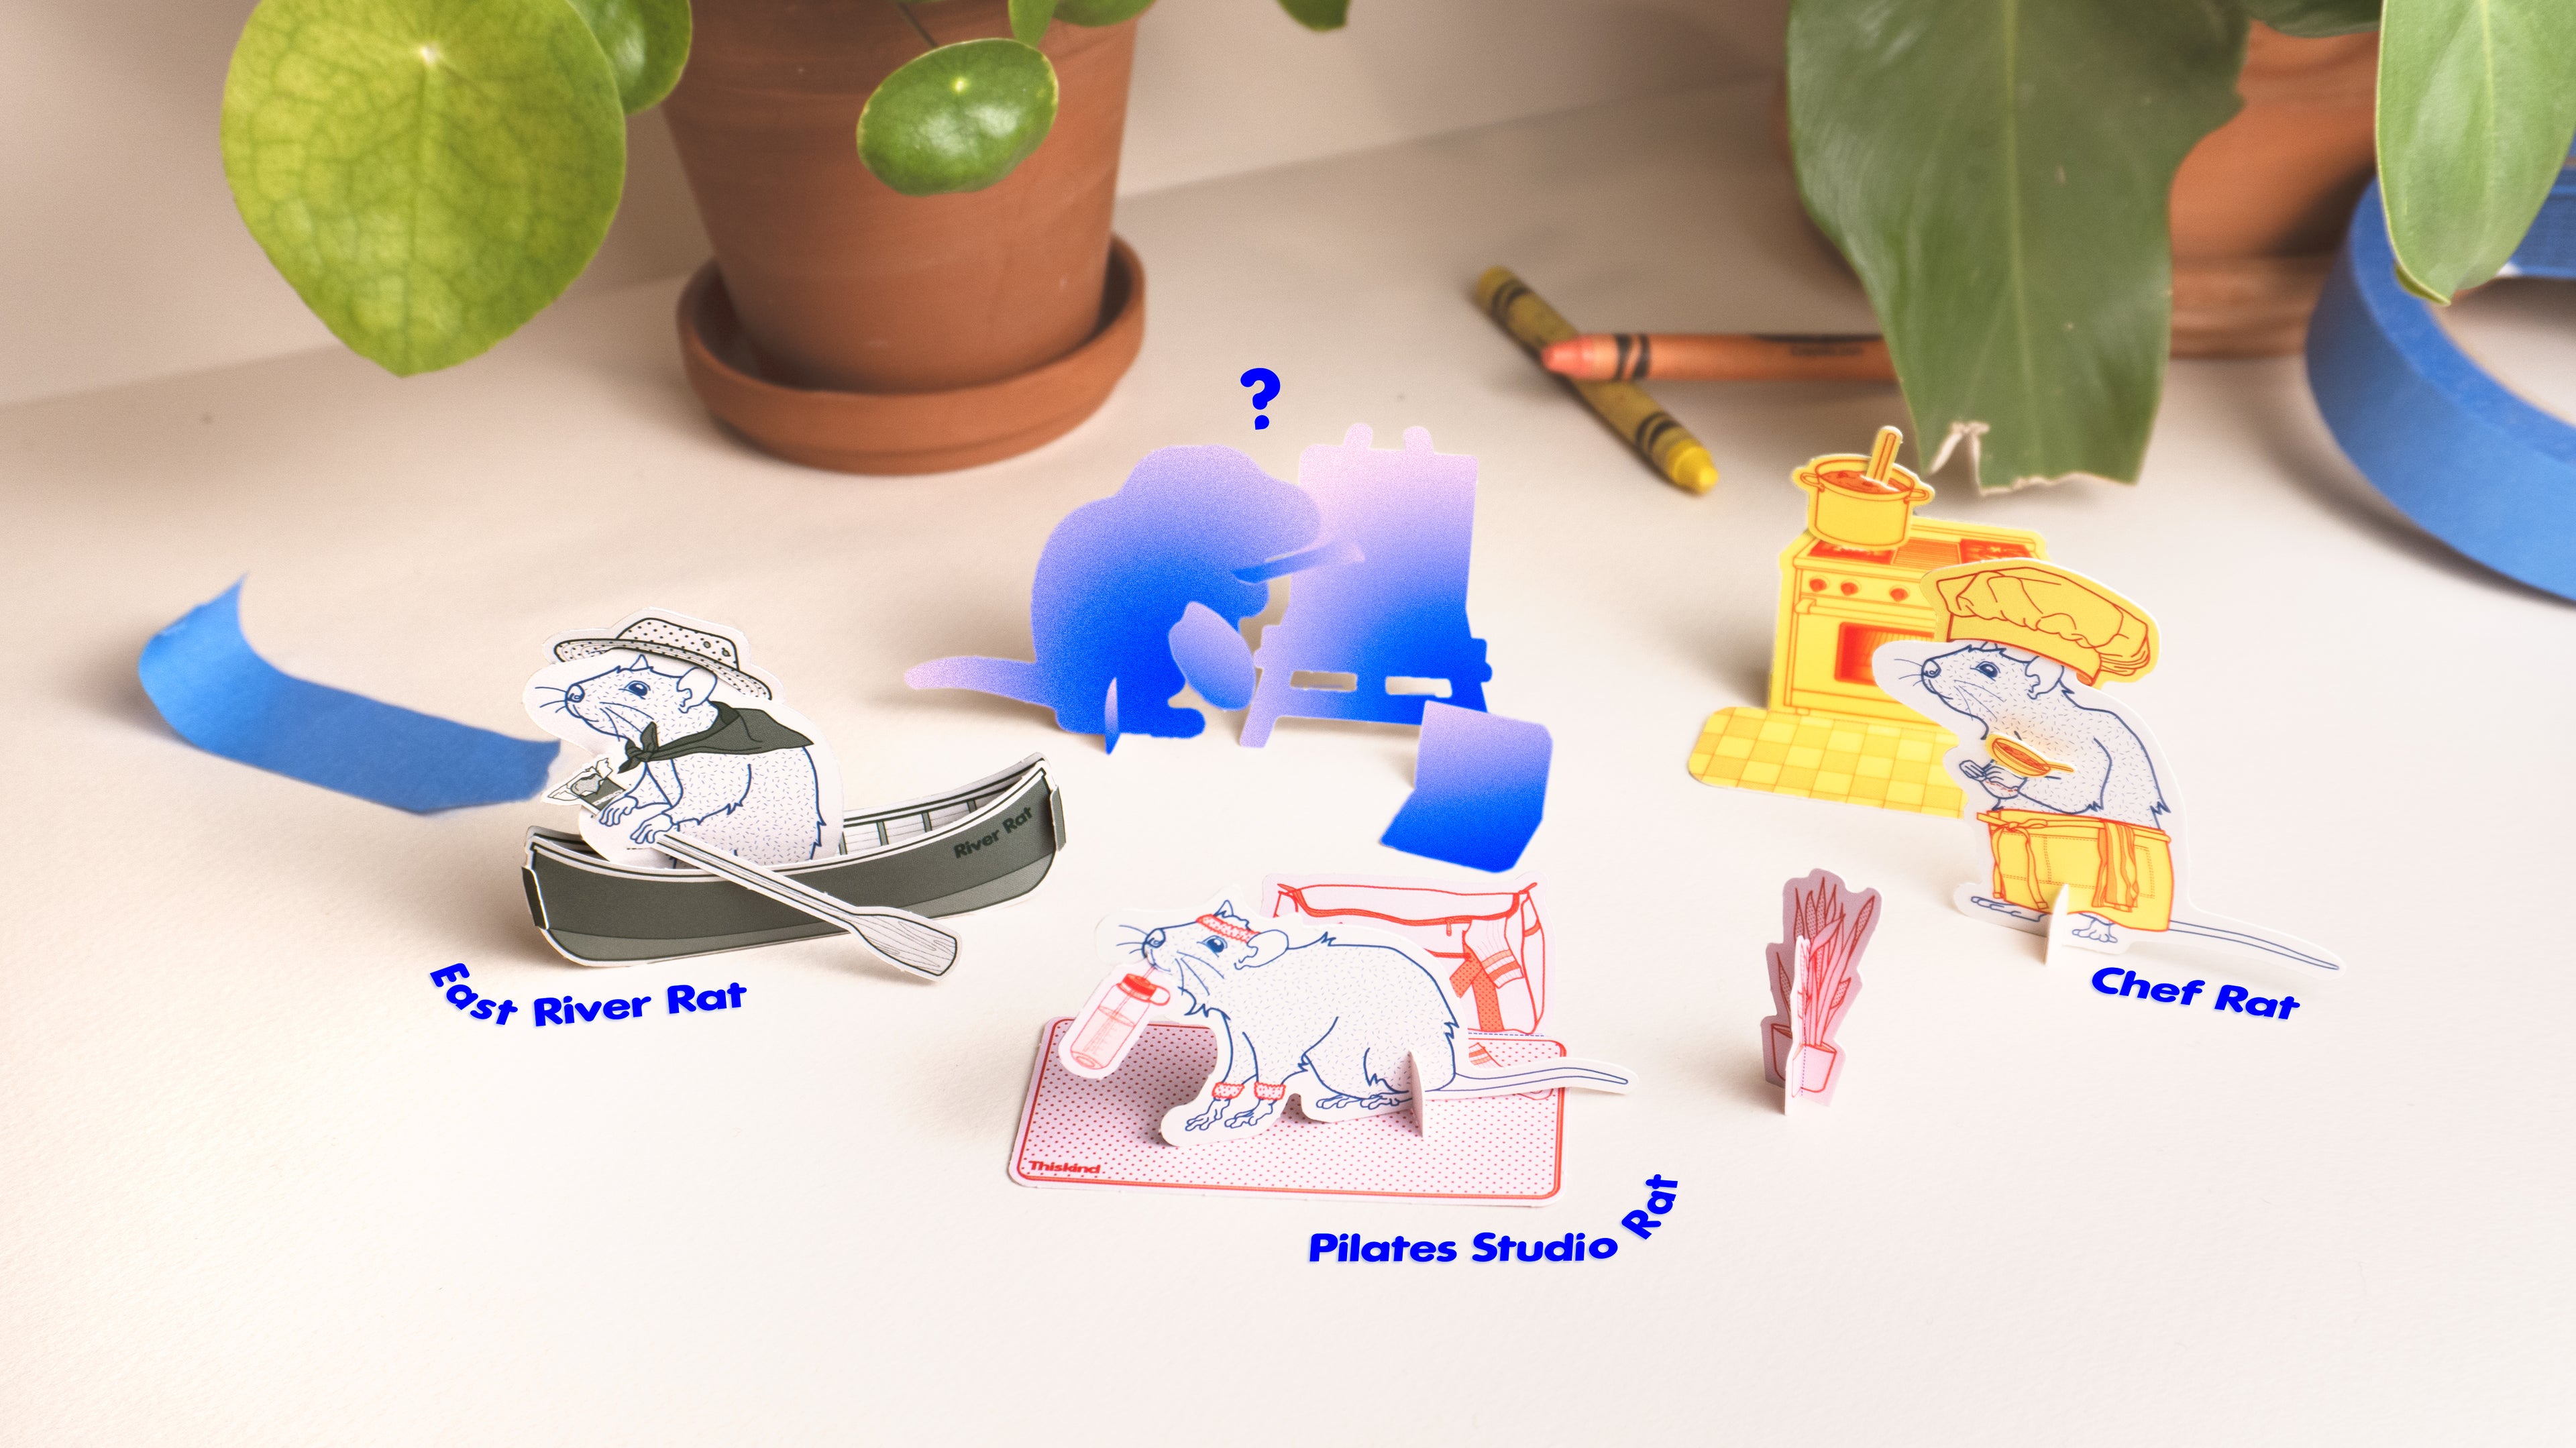 Thiskind collectible mystery rats. Blind bag contains one of four paper craft models shown - River rat, chef rat, pilates rat and ??? Fun toys for adults or kids.